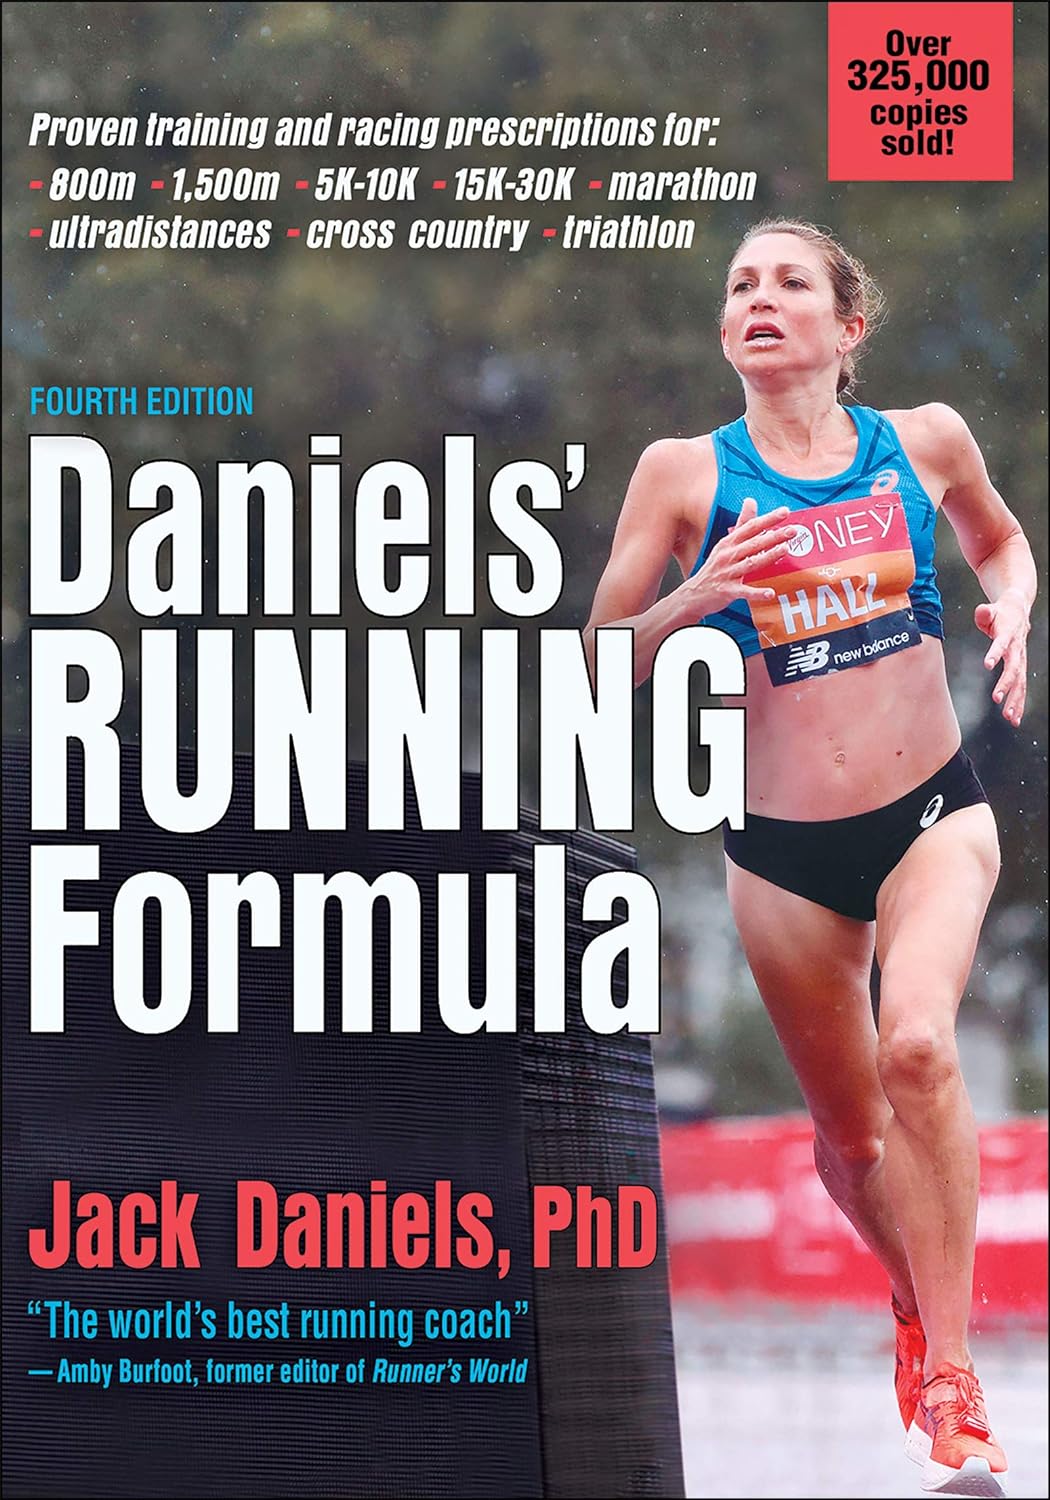 Best Books About The Science Behind Marathon Training